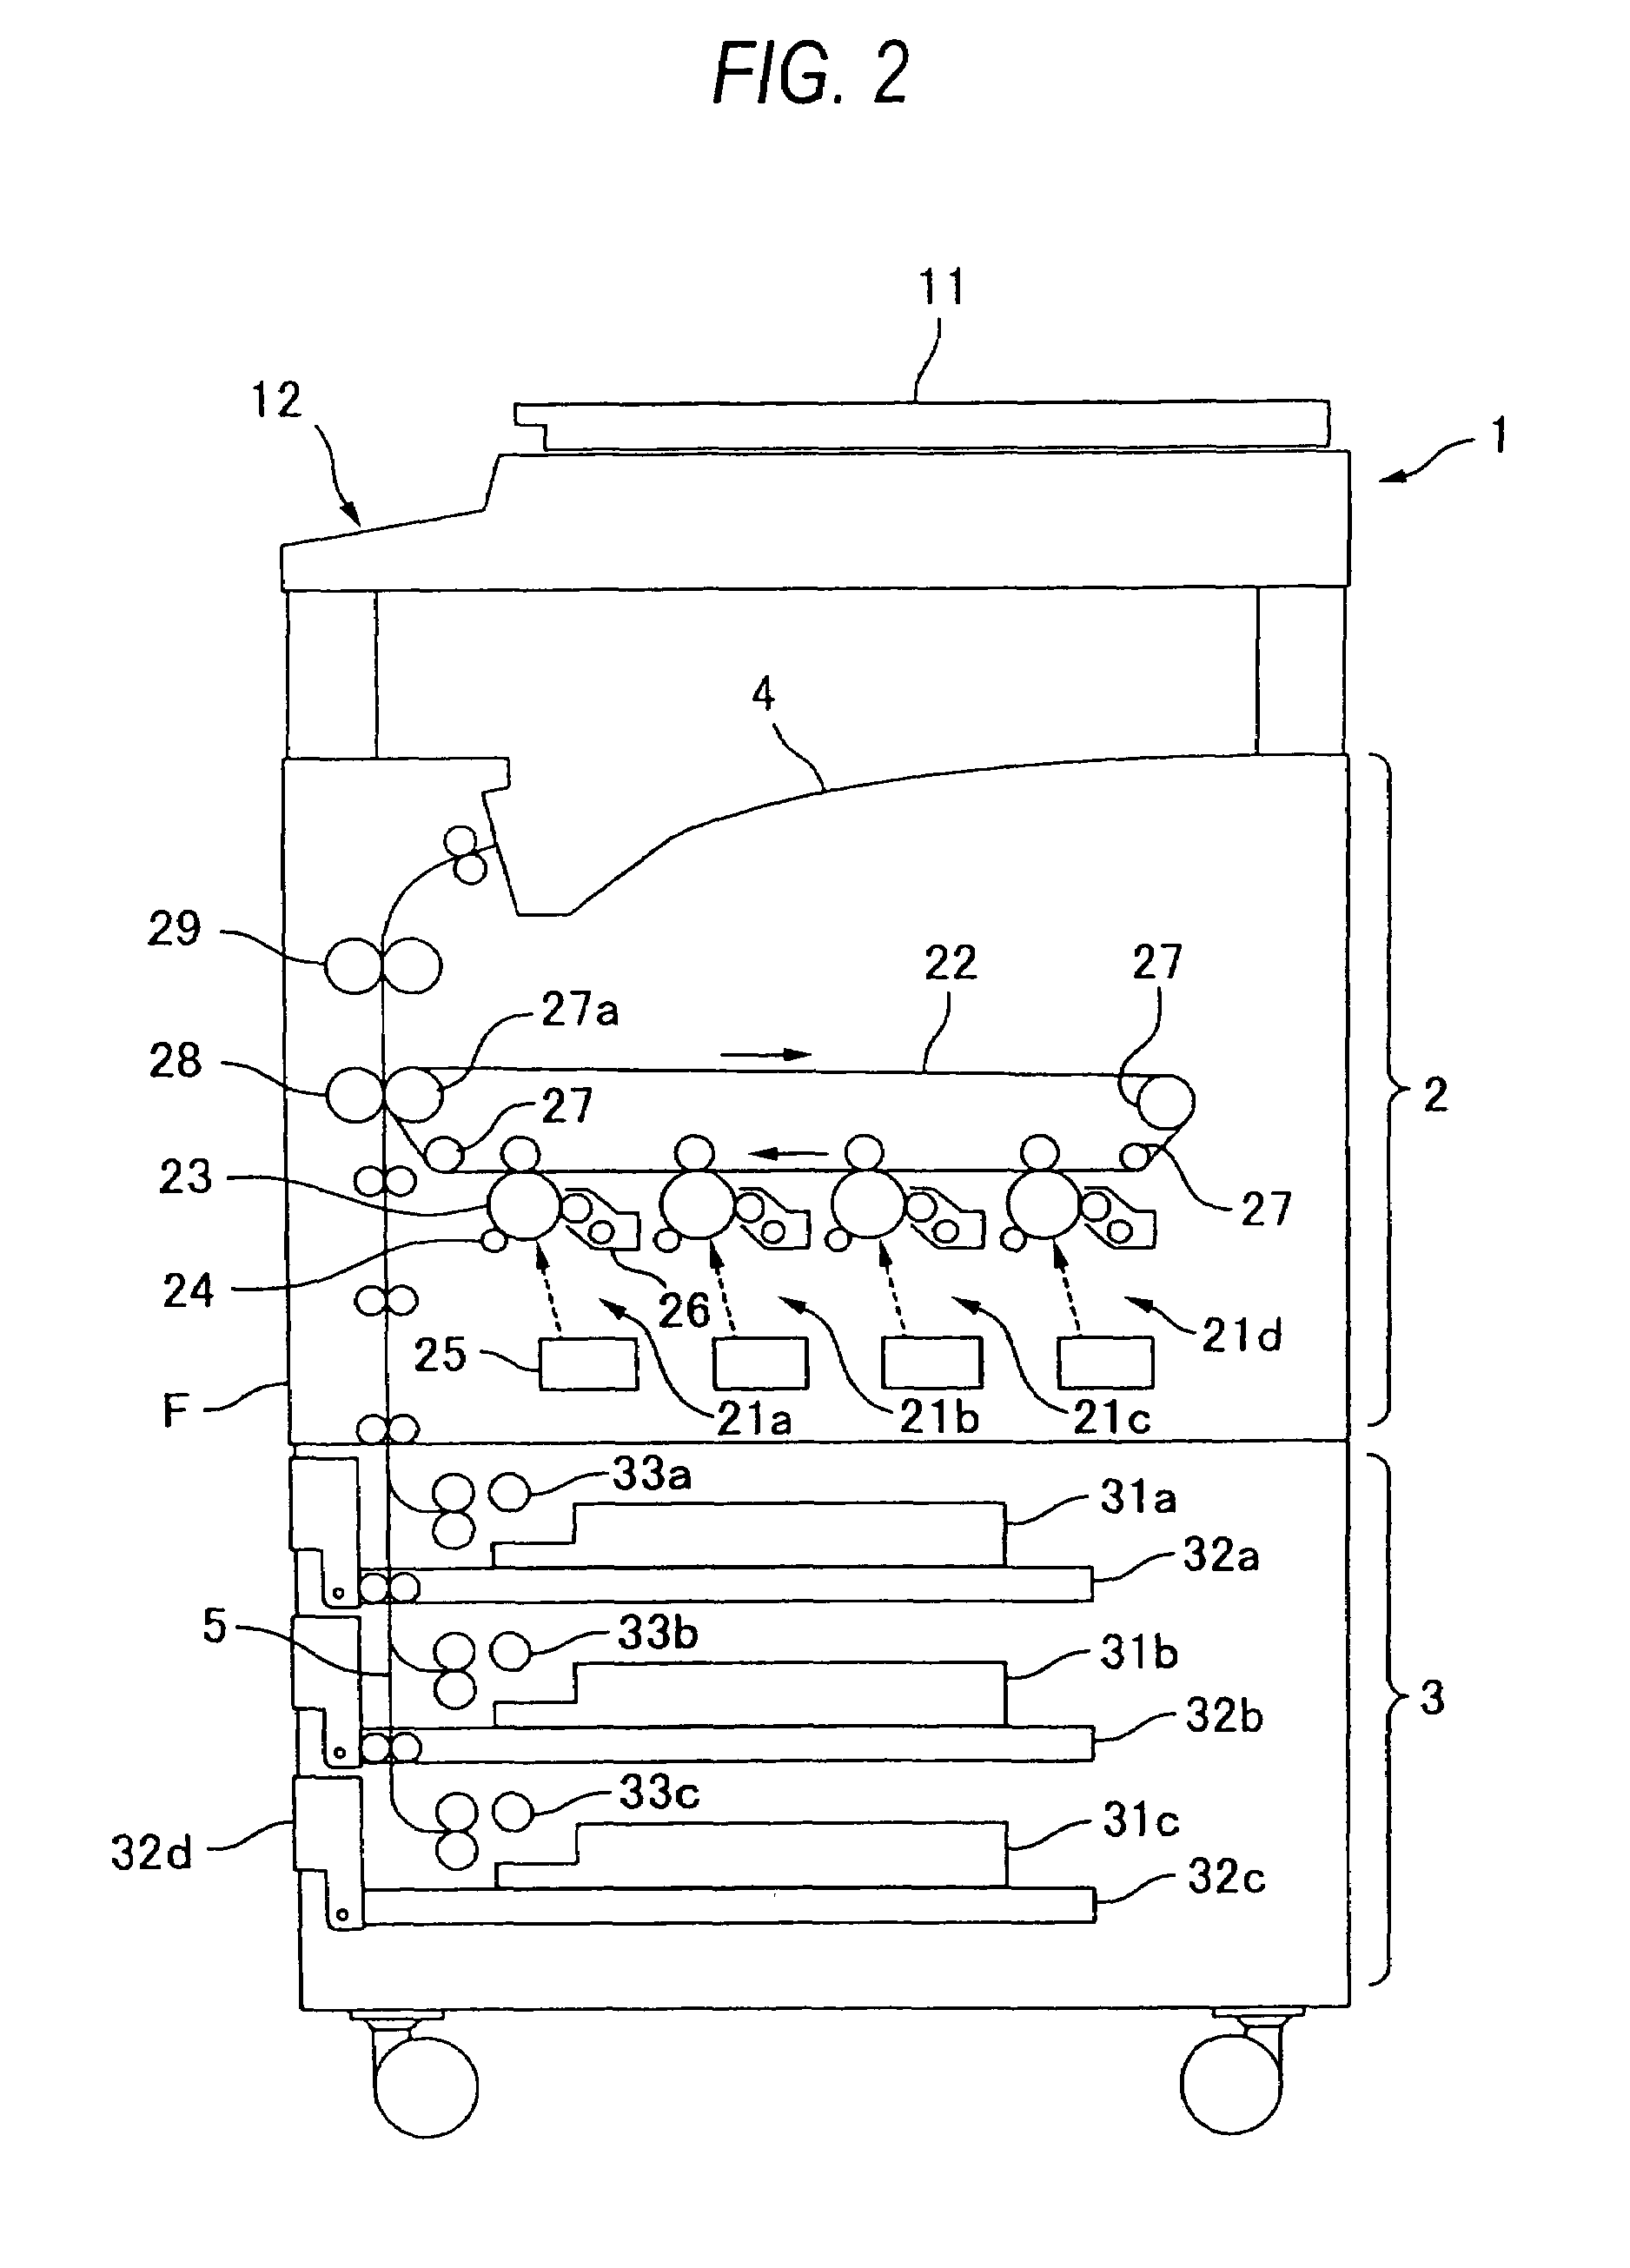 Image forming apparatus with wheelchair accessibility